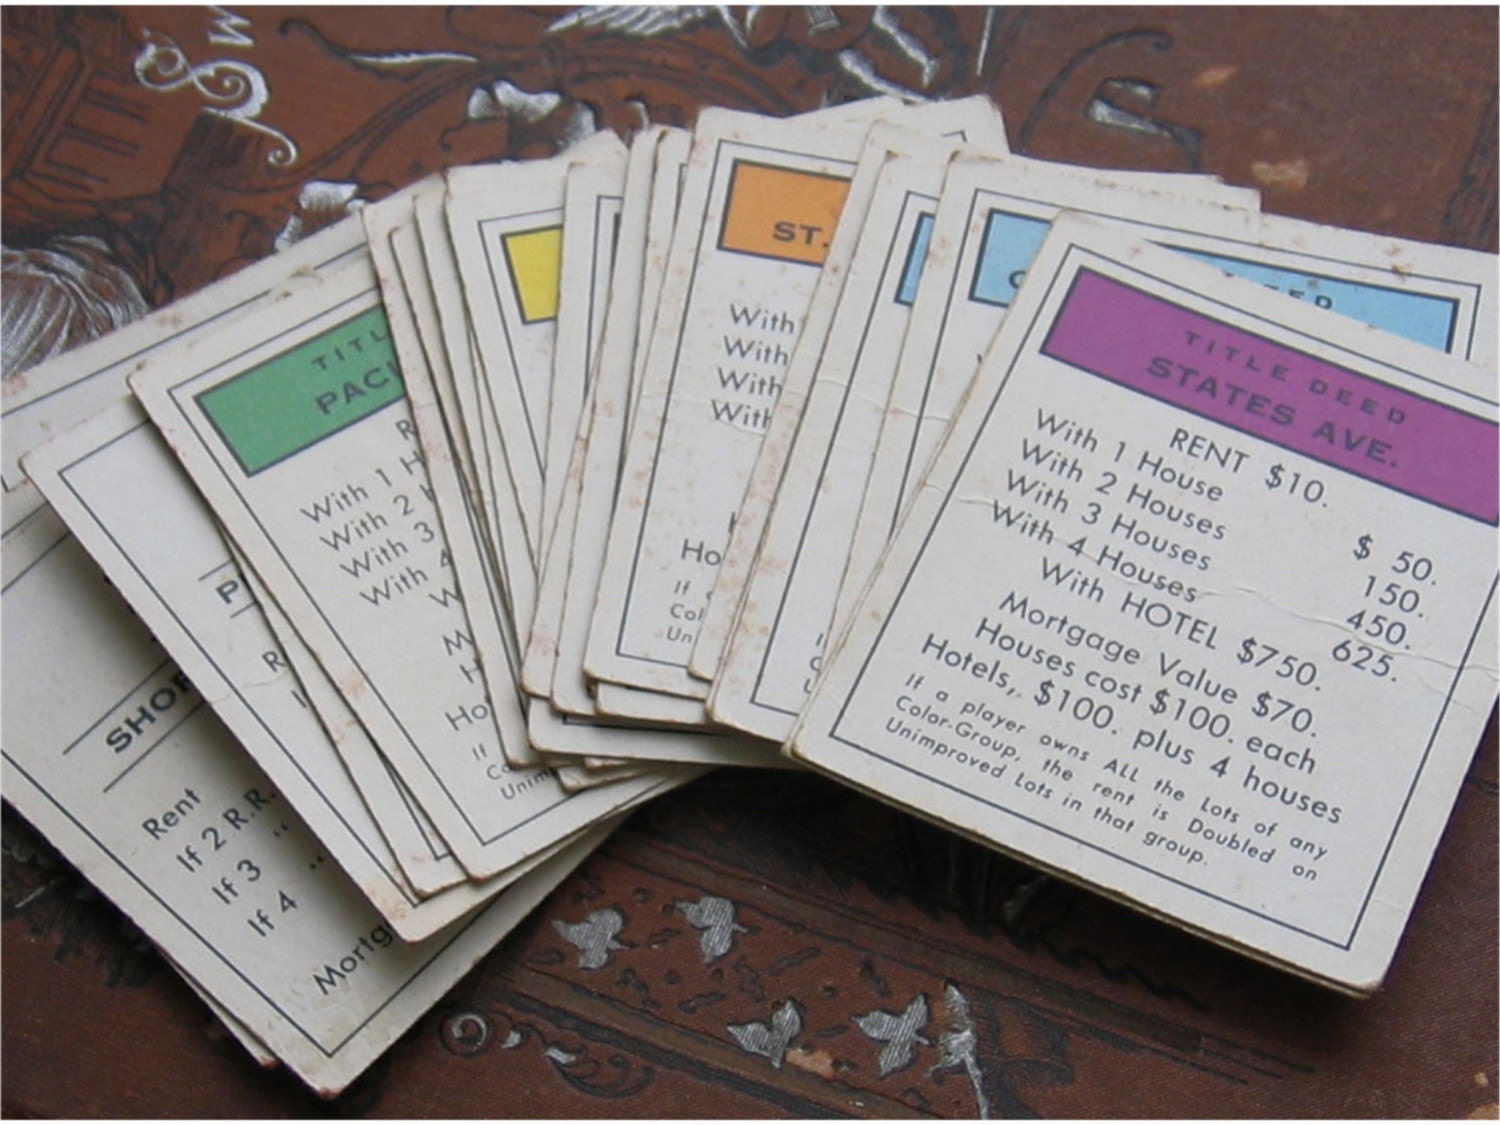 25 Vintage Monopoly Title Deed Cards Utility by mysunshinevintage